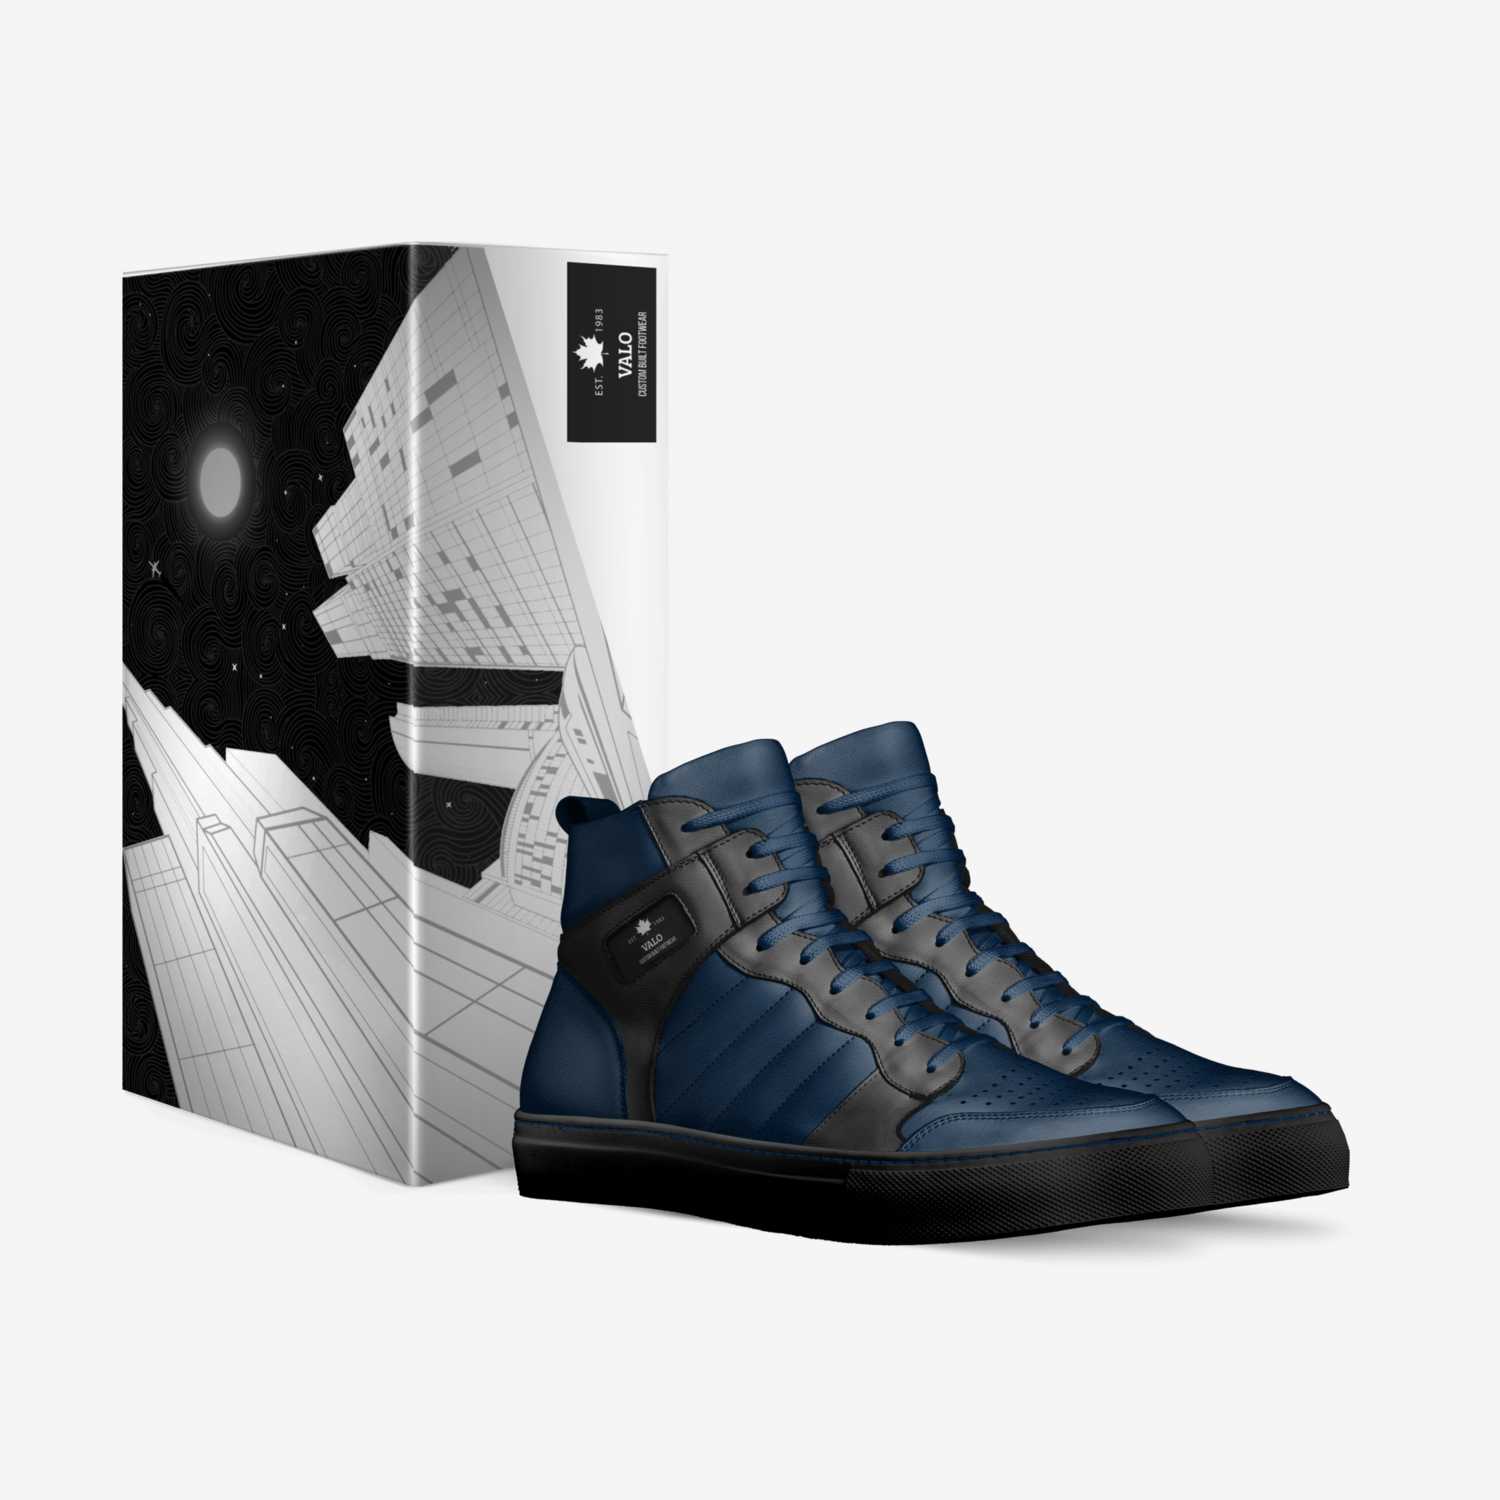 VALO custom made in Italy shoes by Andre Dominic | Box view